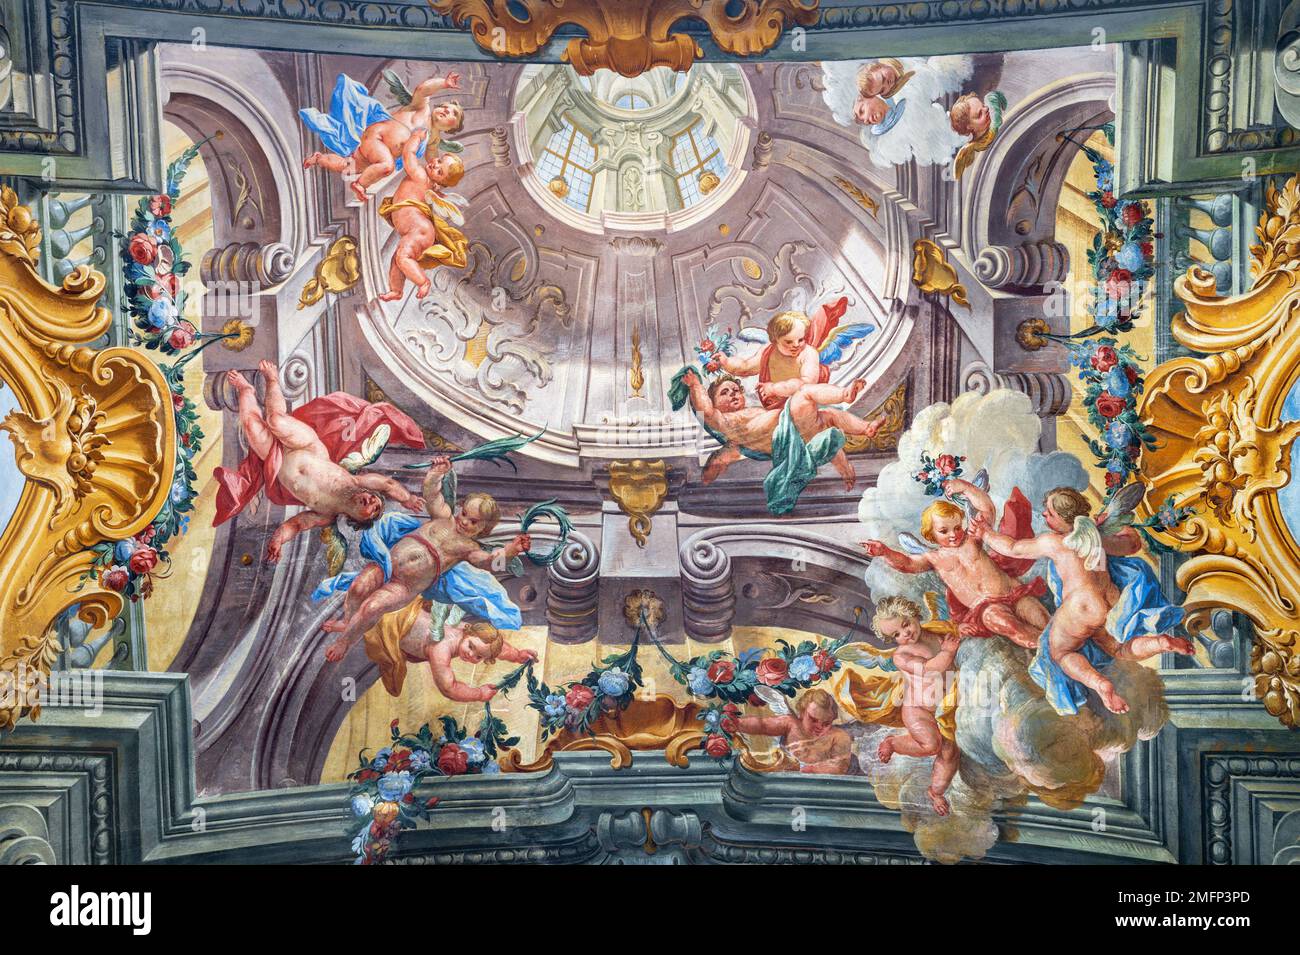 VARALLO, ITALY - JULY 17, 2022: The fresco of baroque angels among the flowers in the church Basilica del Sacro Monte by Francesco Leva (1714). Stock Photo